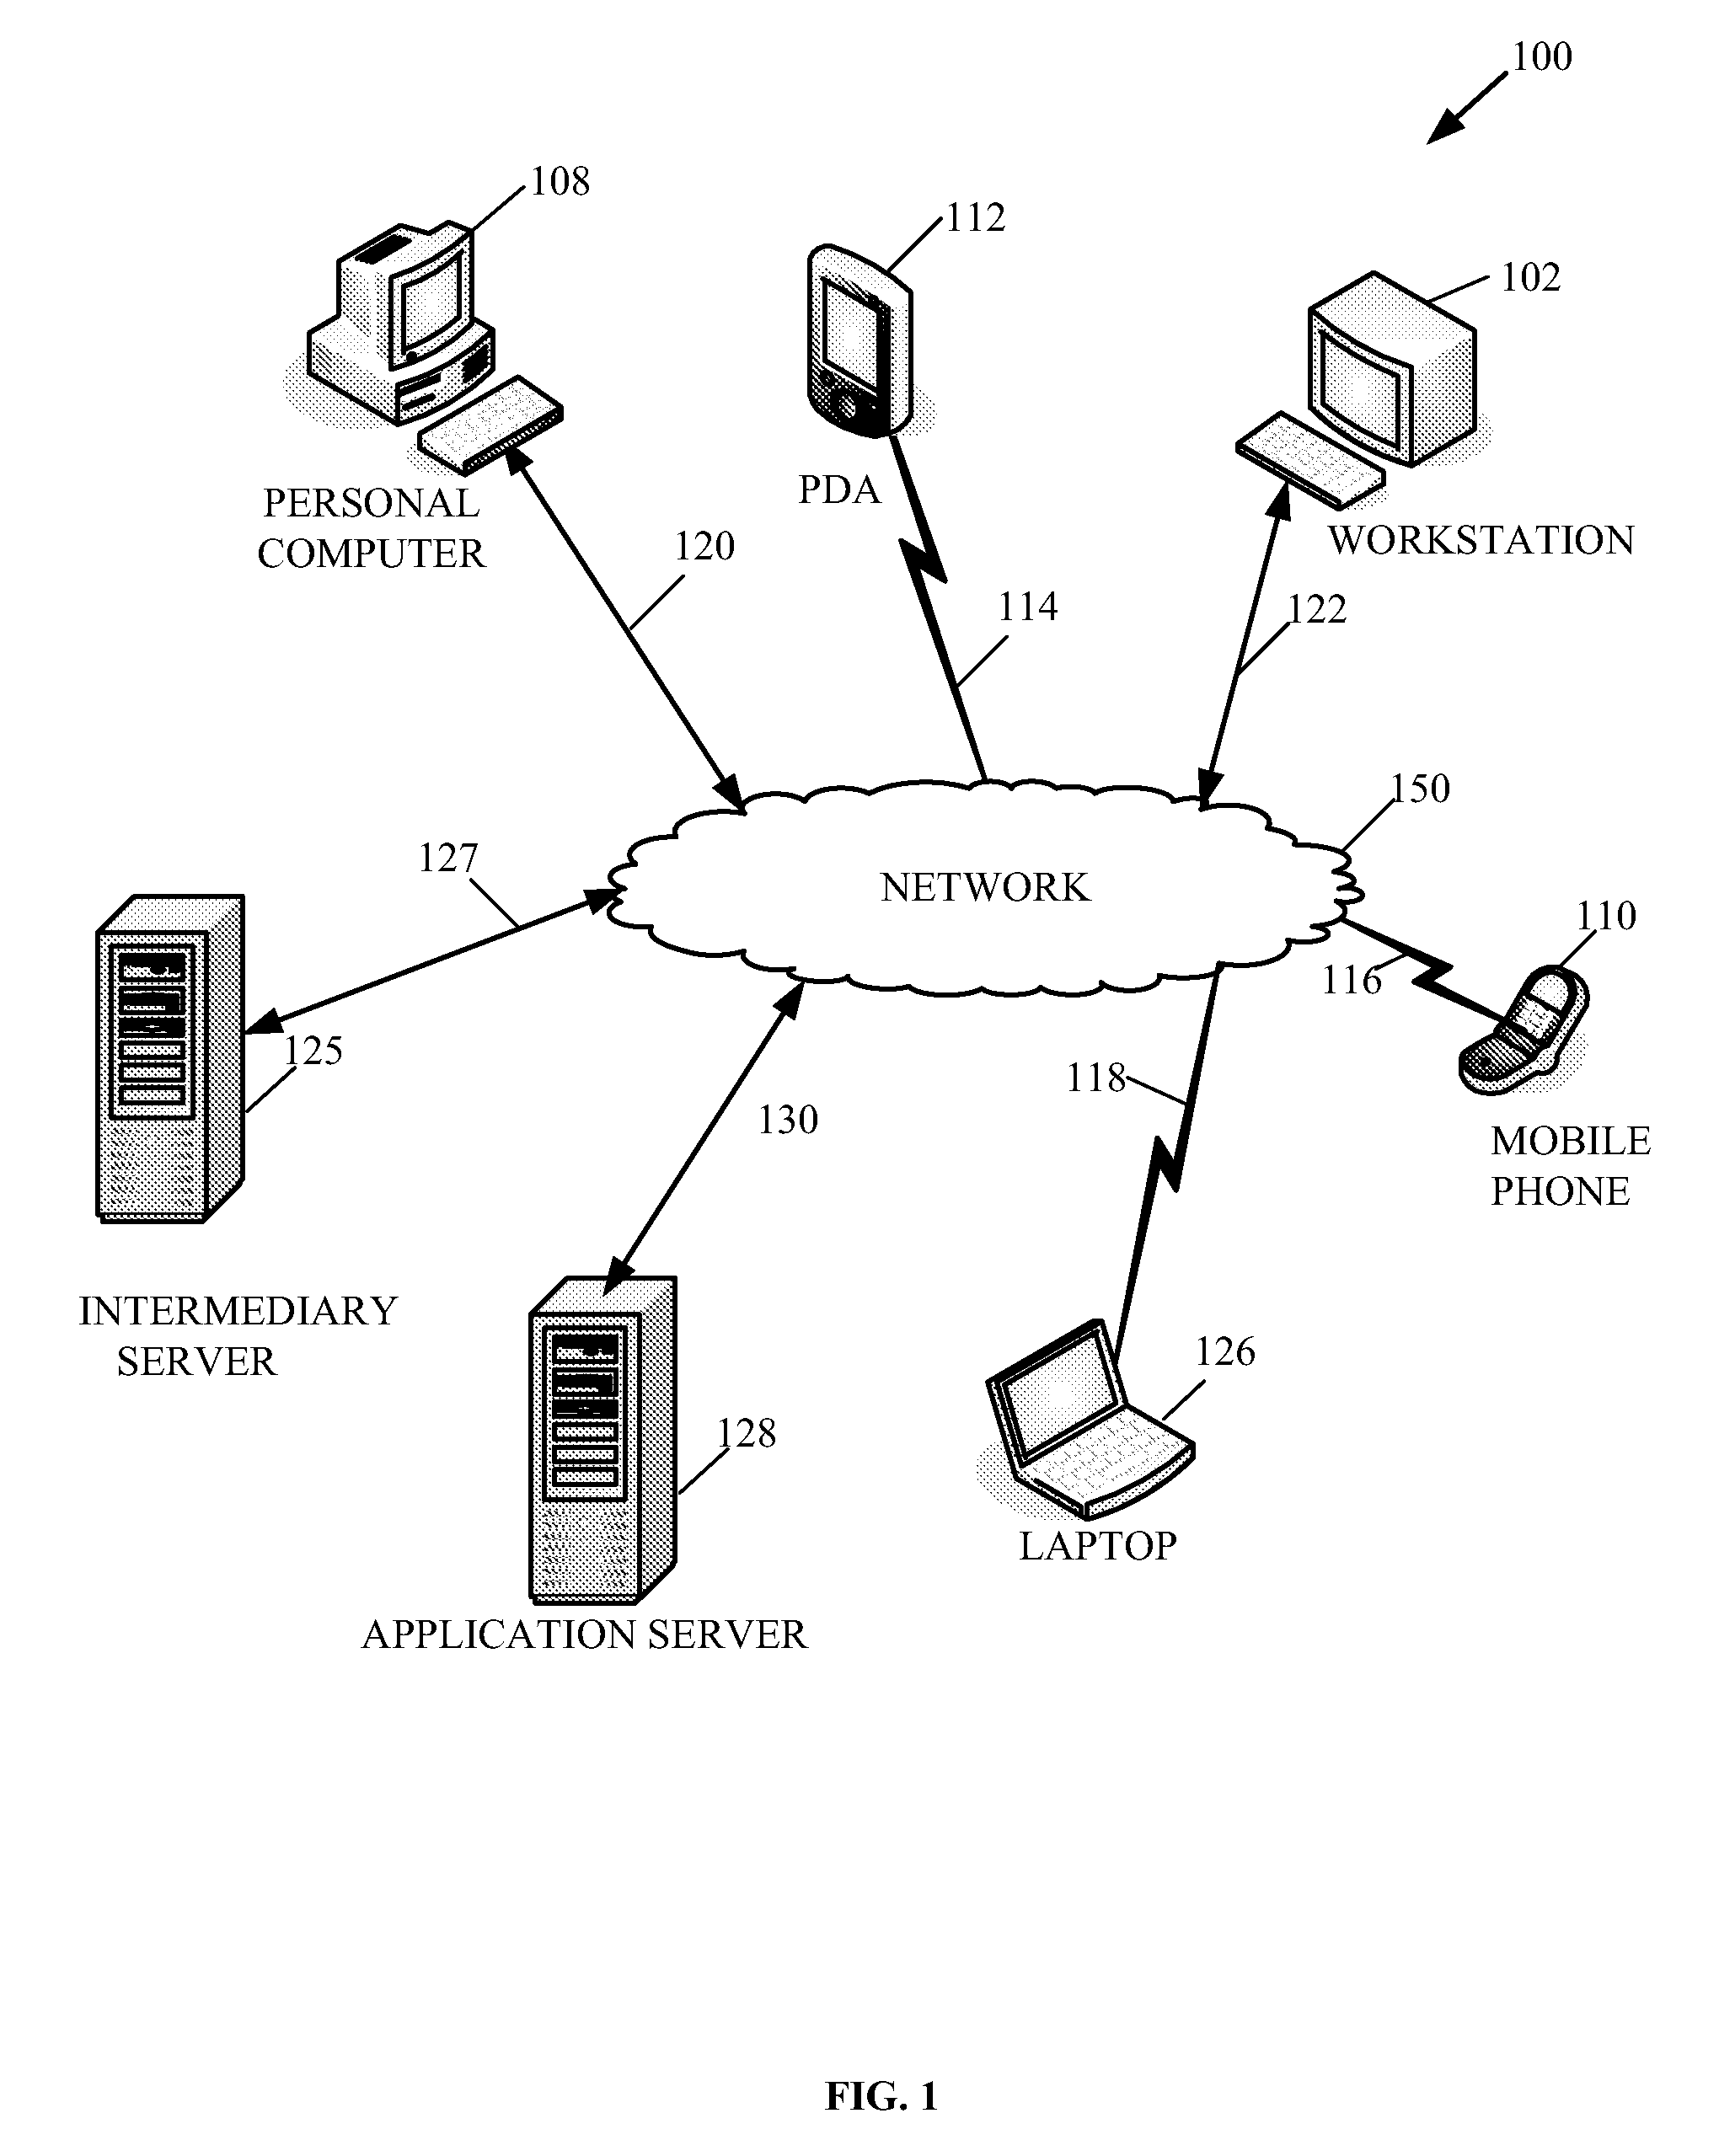 Configuration mechanism for flexible messaging security protocols